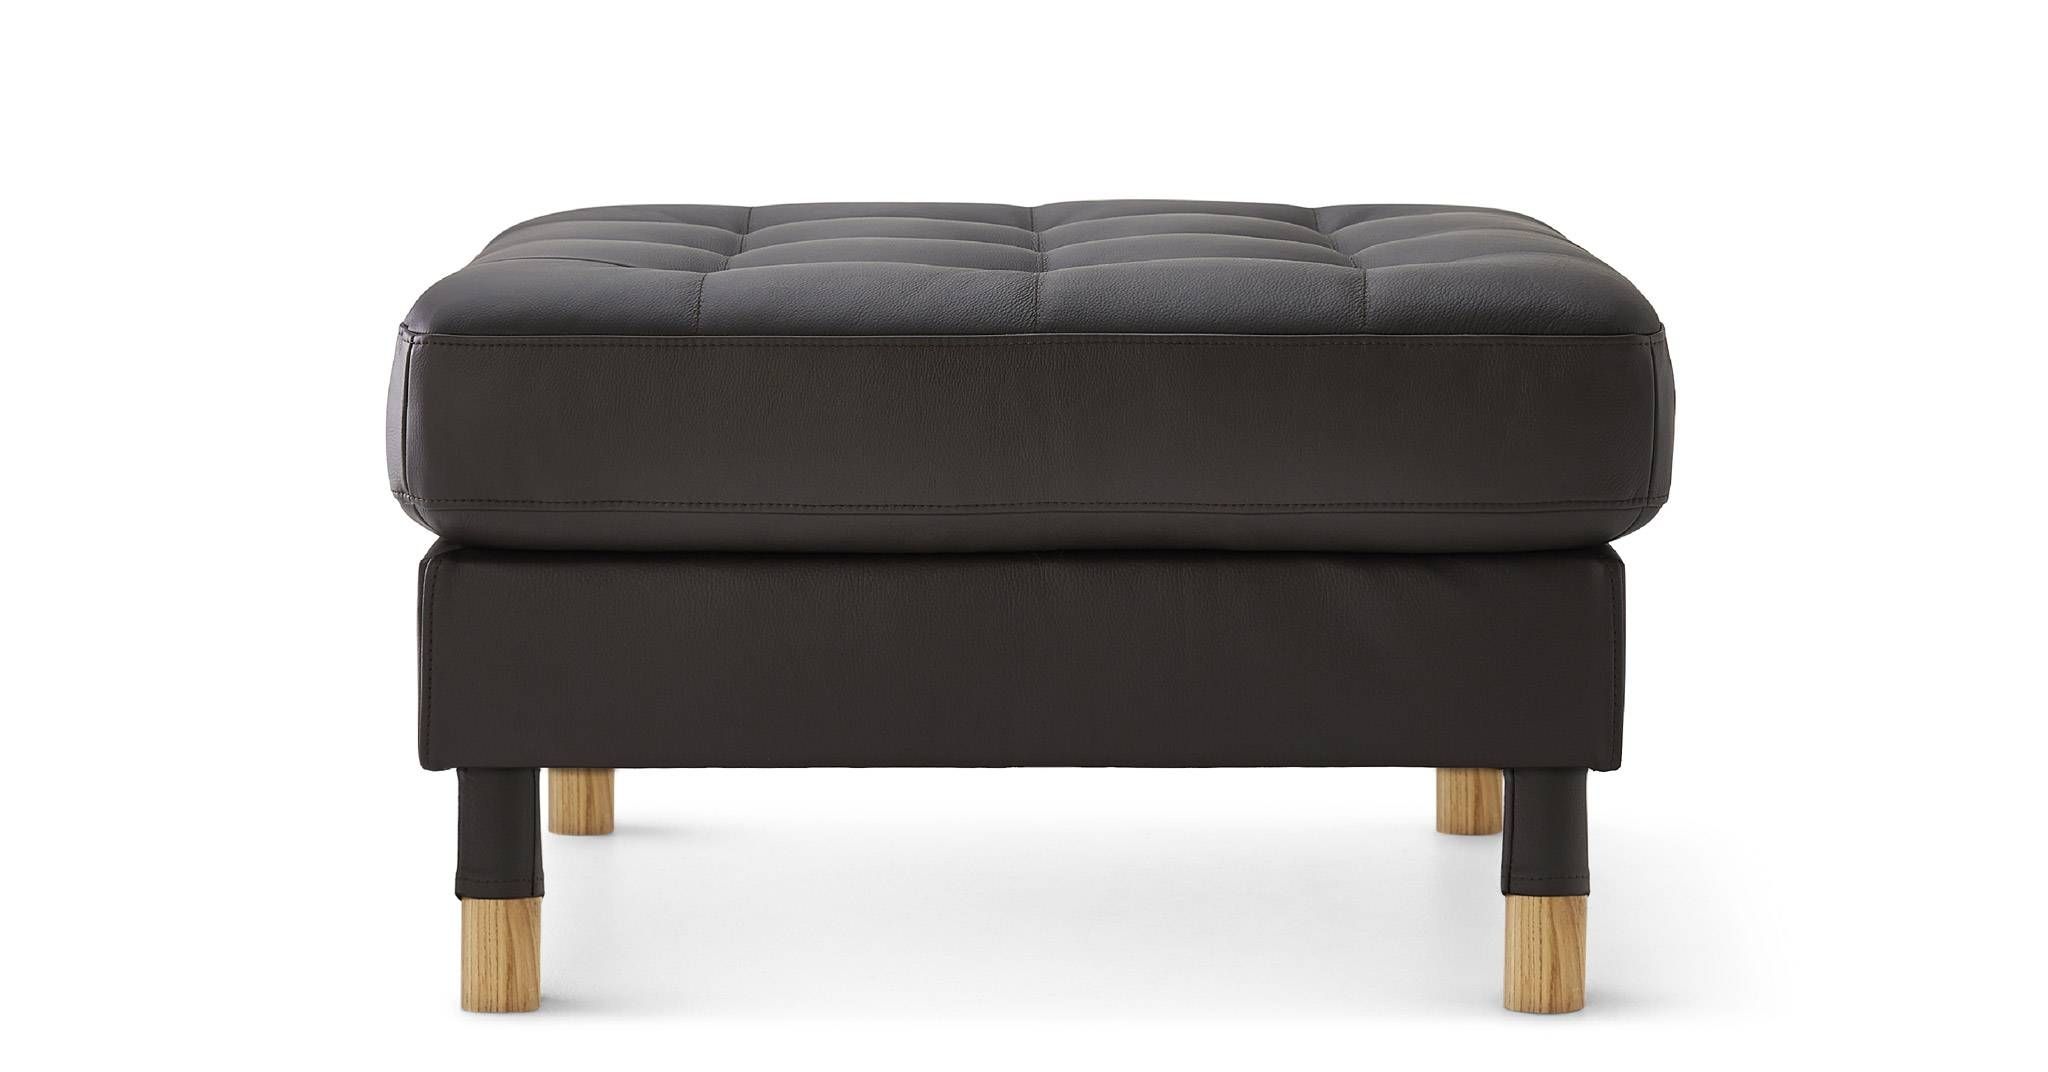 Leather Footstool & Leather Pouffes | Ikea Regarding Leather Footstools (View 16 of 30)